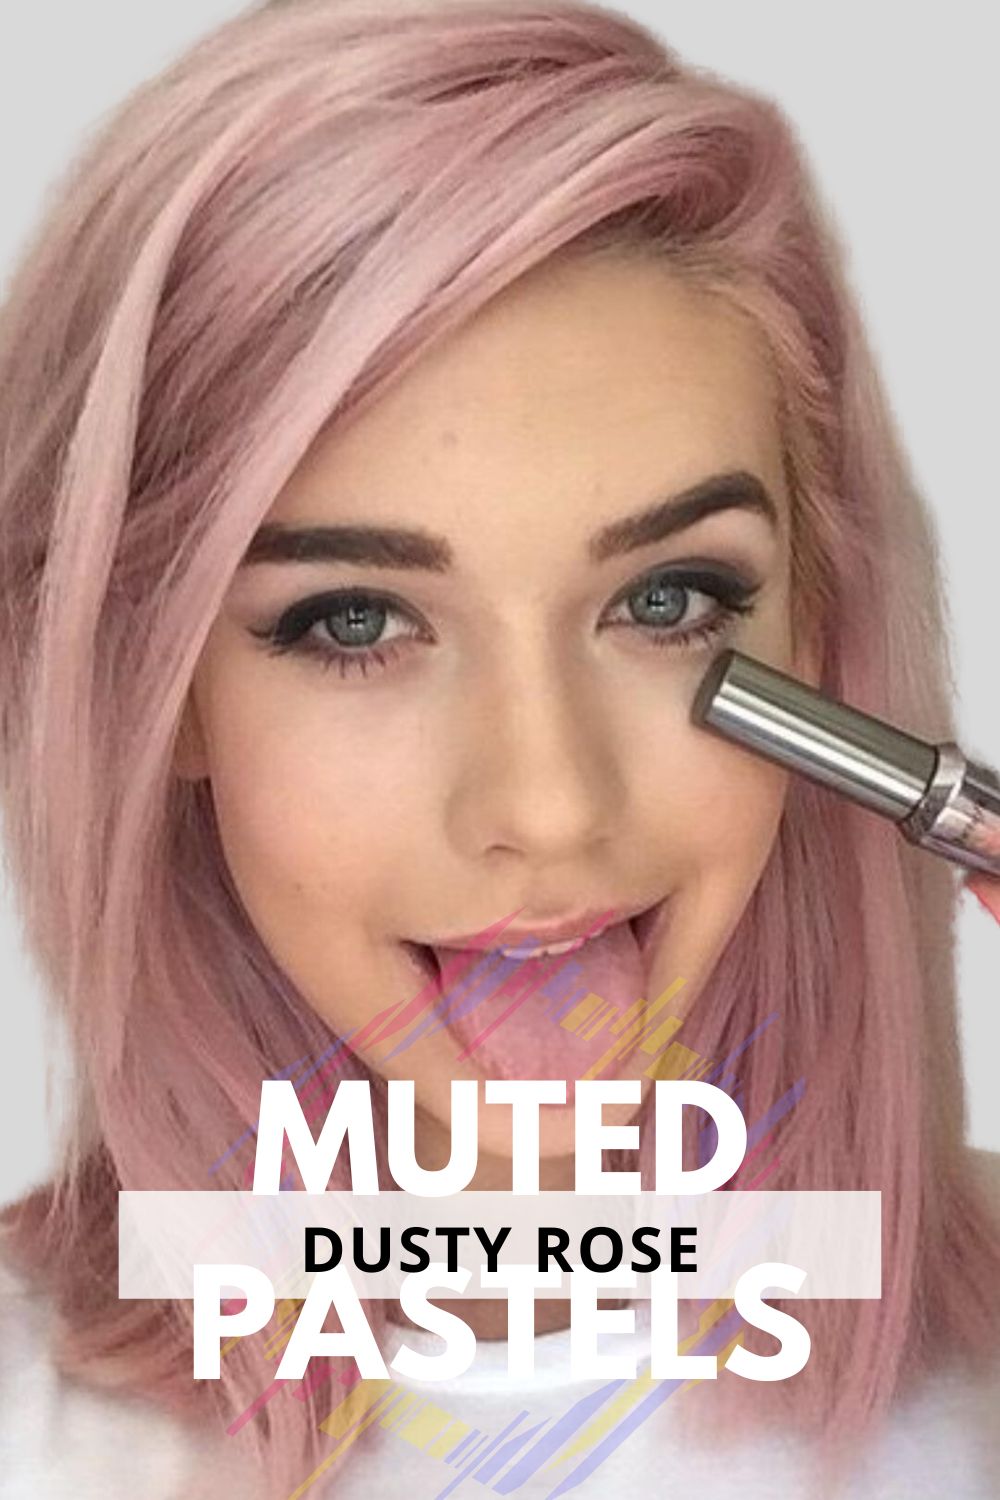 Muted Pastels Dusty Rose